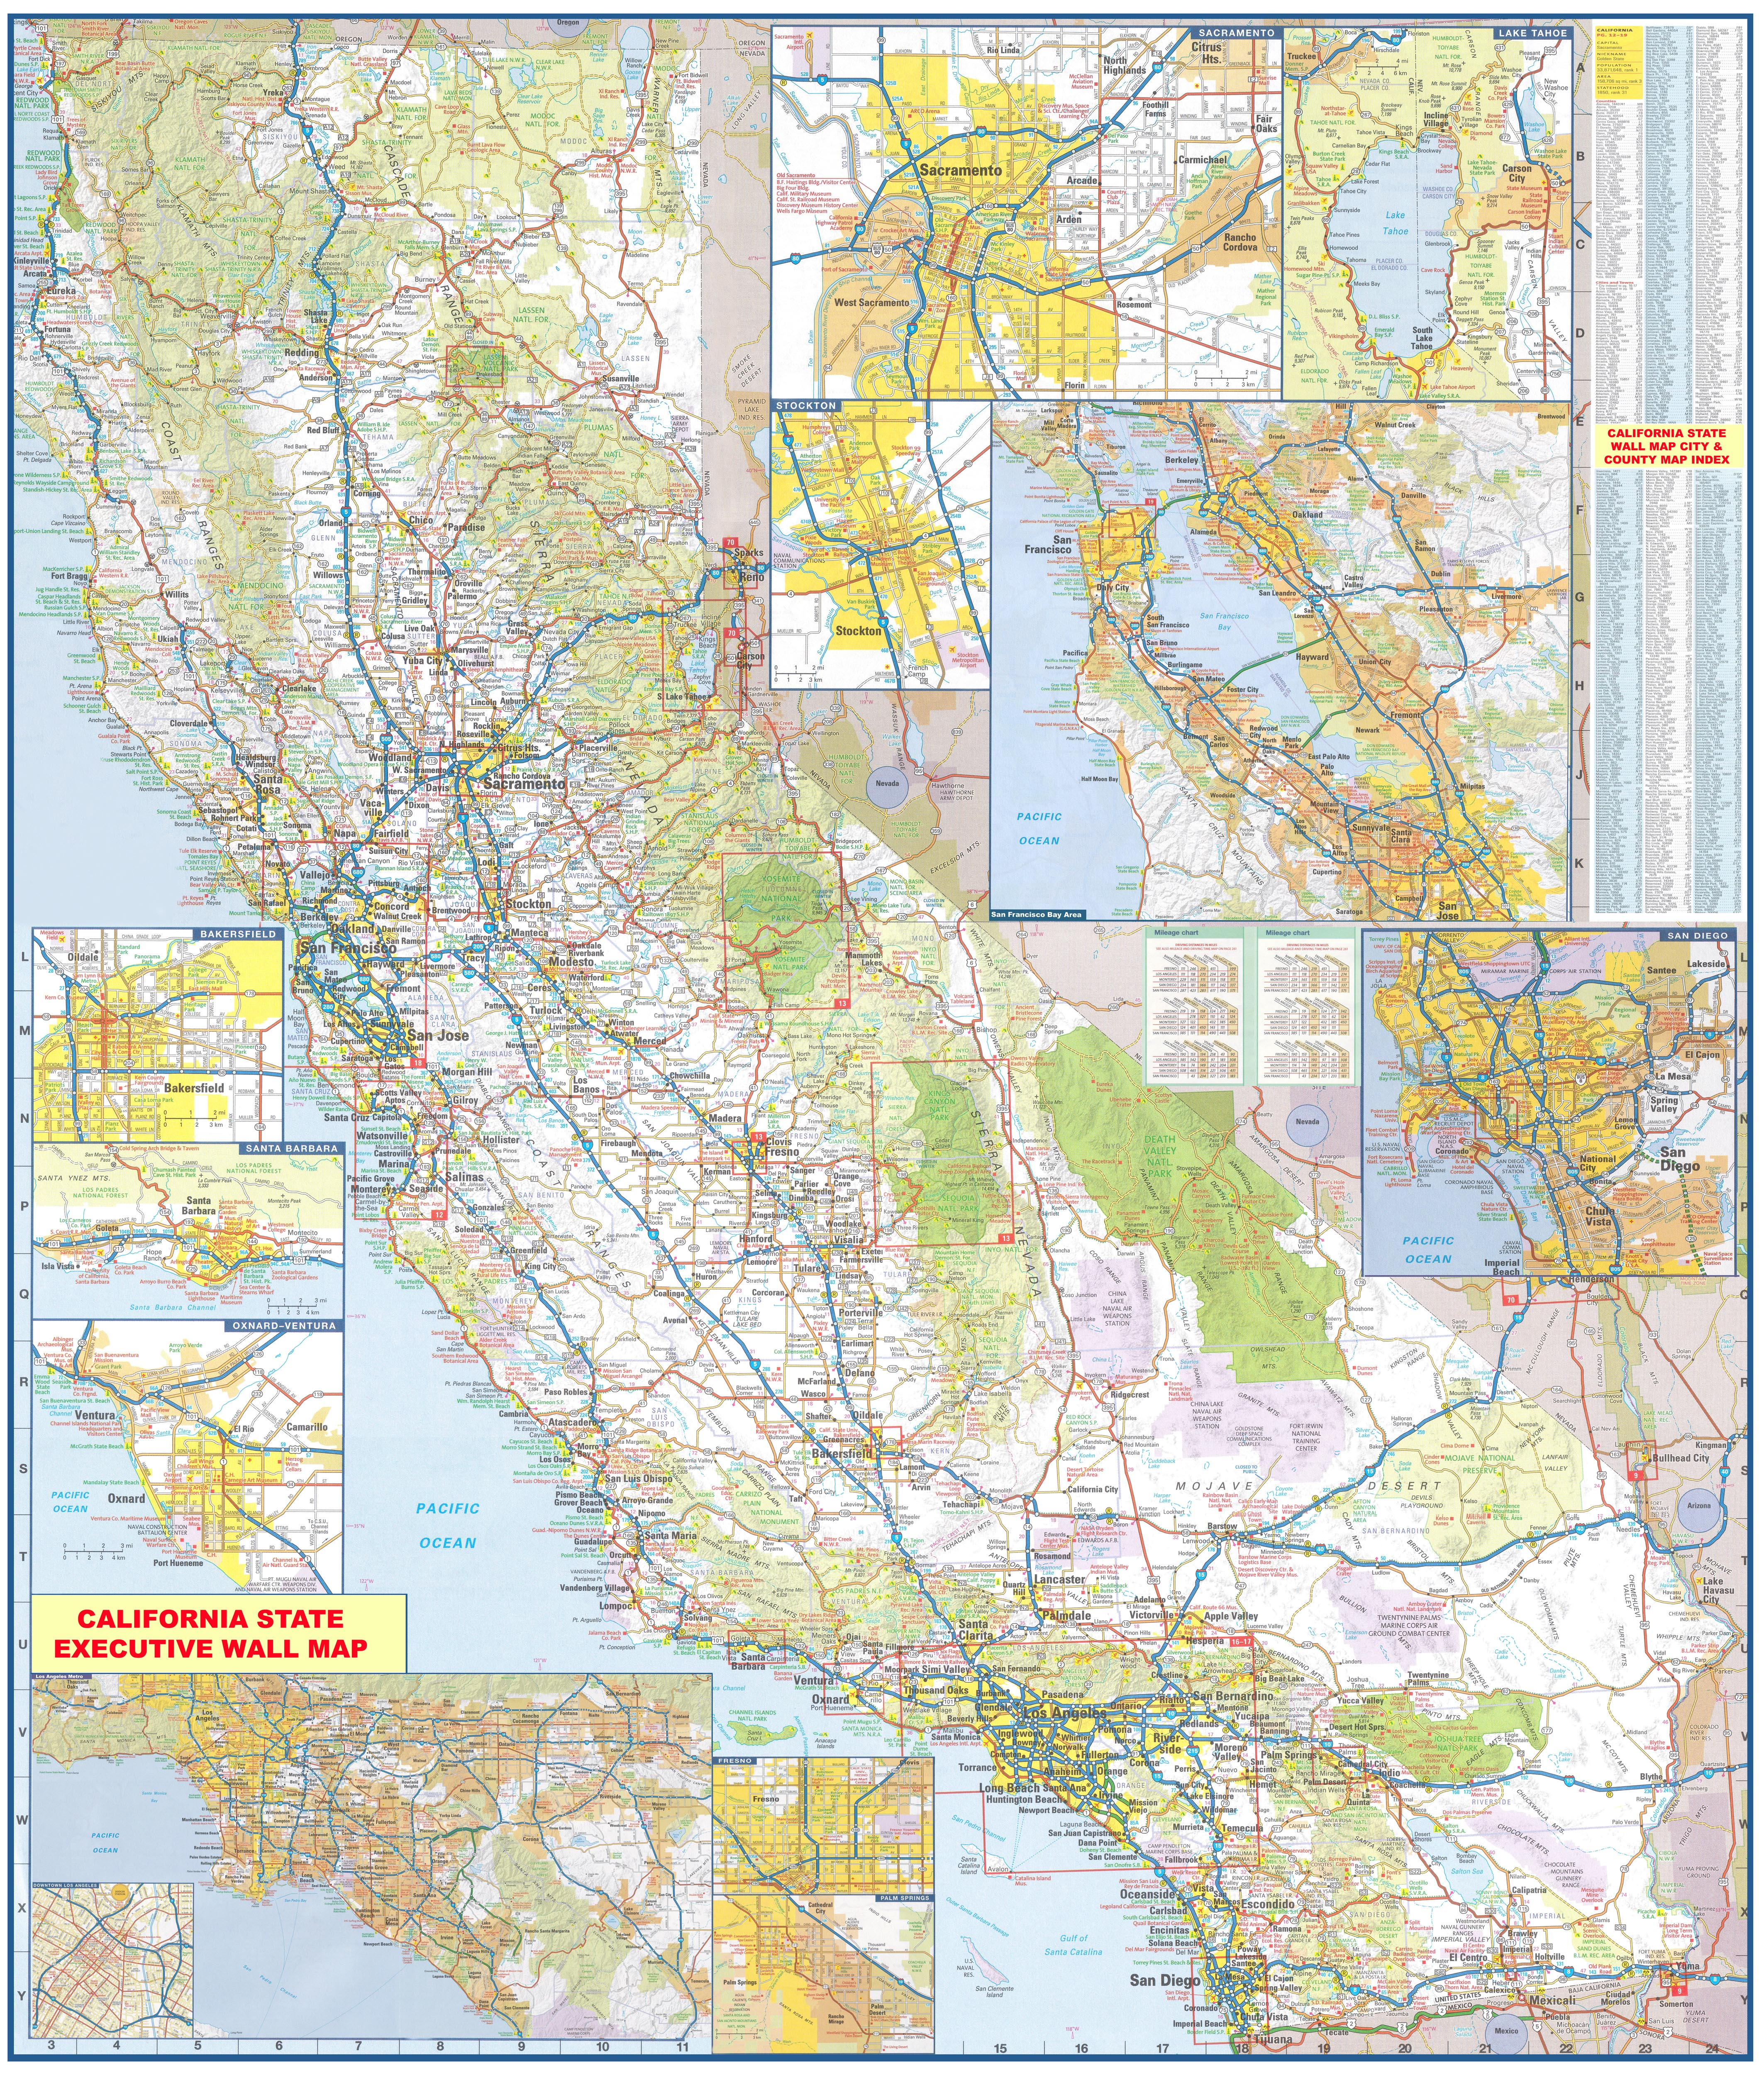 State Wall Maps Archives - Swiftmaps - Northern California Wall Map